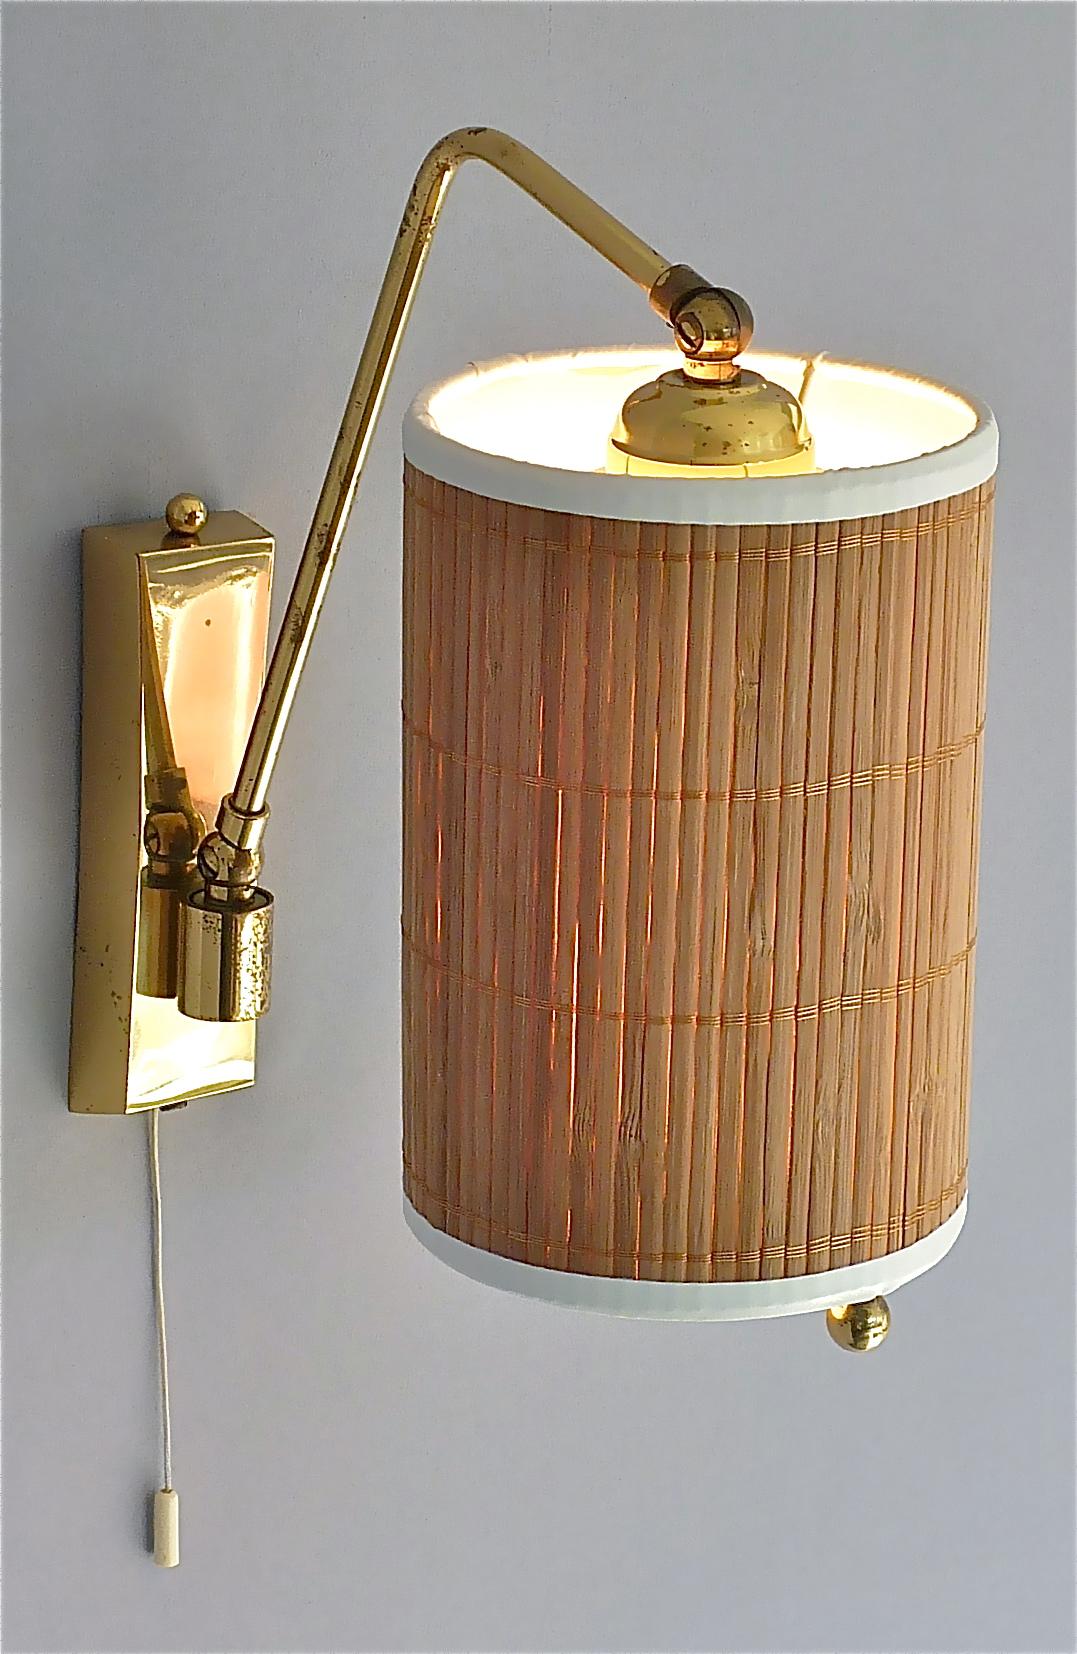 Wall Lamp Paavo Tynell Taito Oy Kalmar Style Brass Cane Wood Shade 1950s Sconce For Sale 7